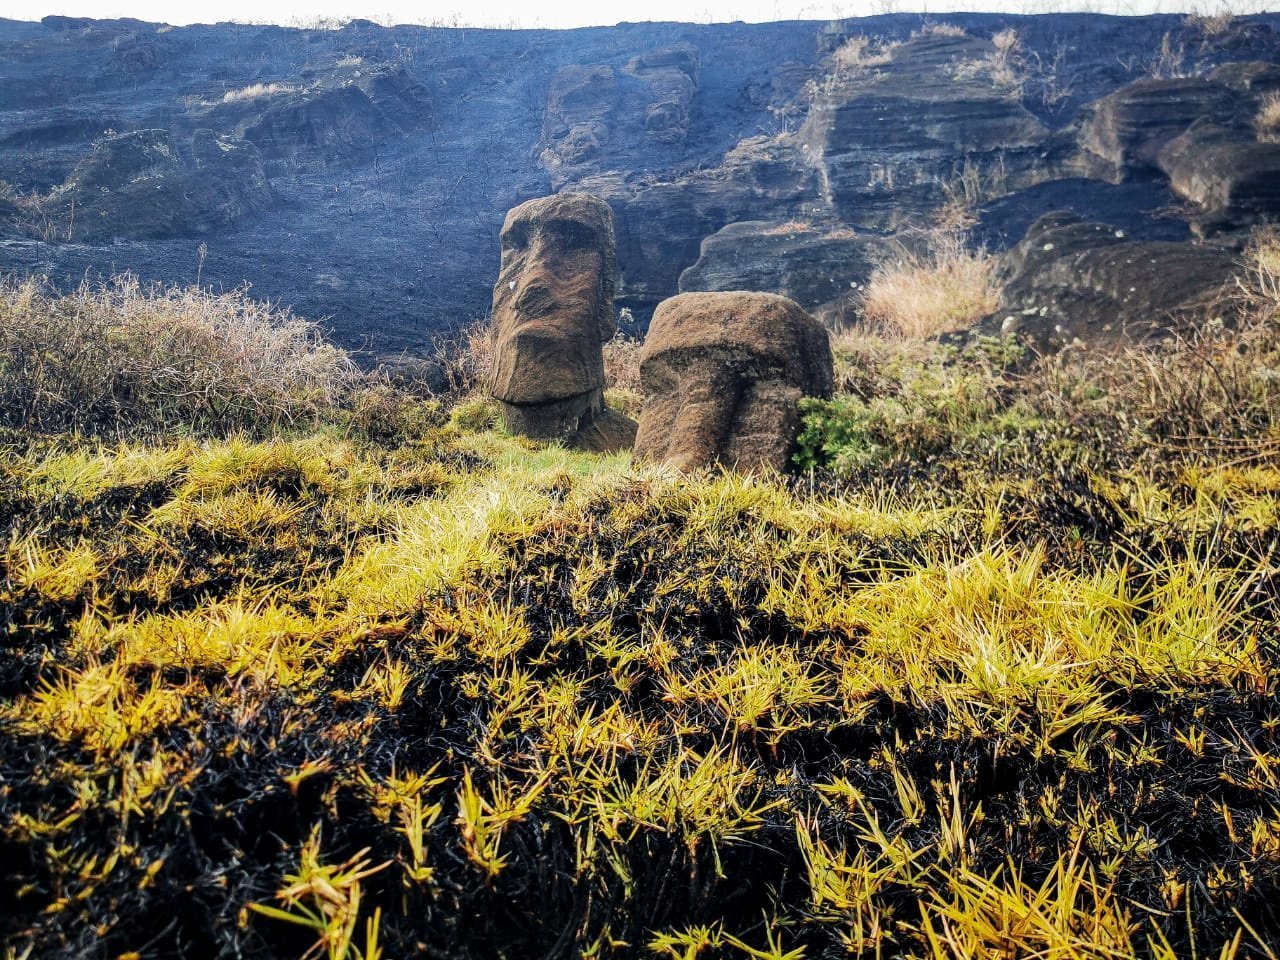 Damaged Moai Statues Are Seen After A Wildfire At A Local Park, In Easter Island